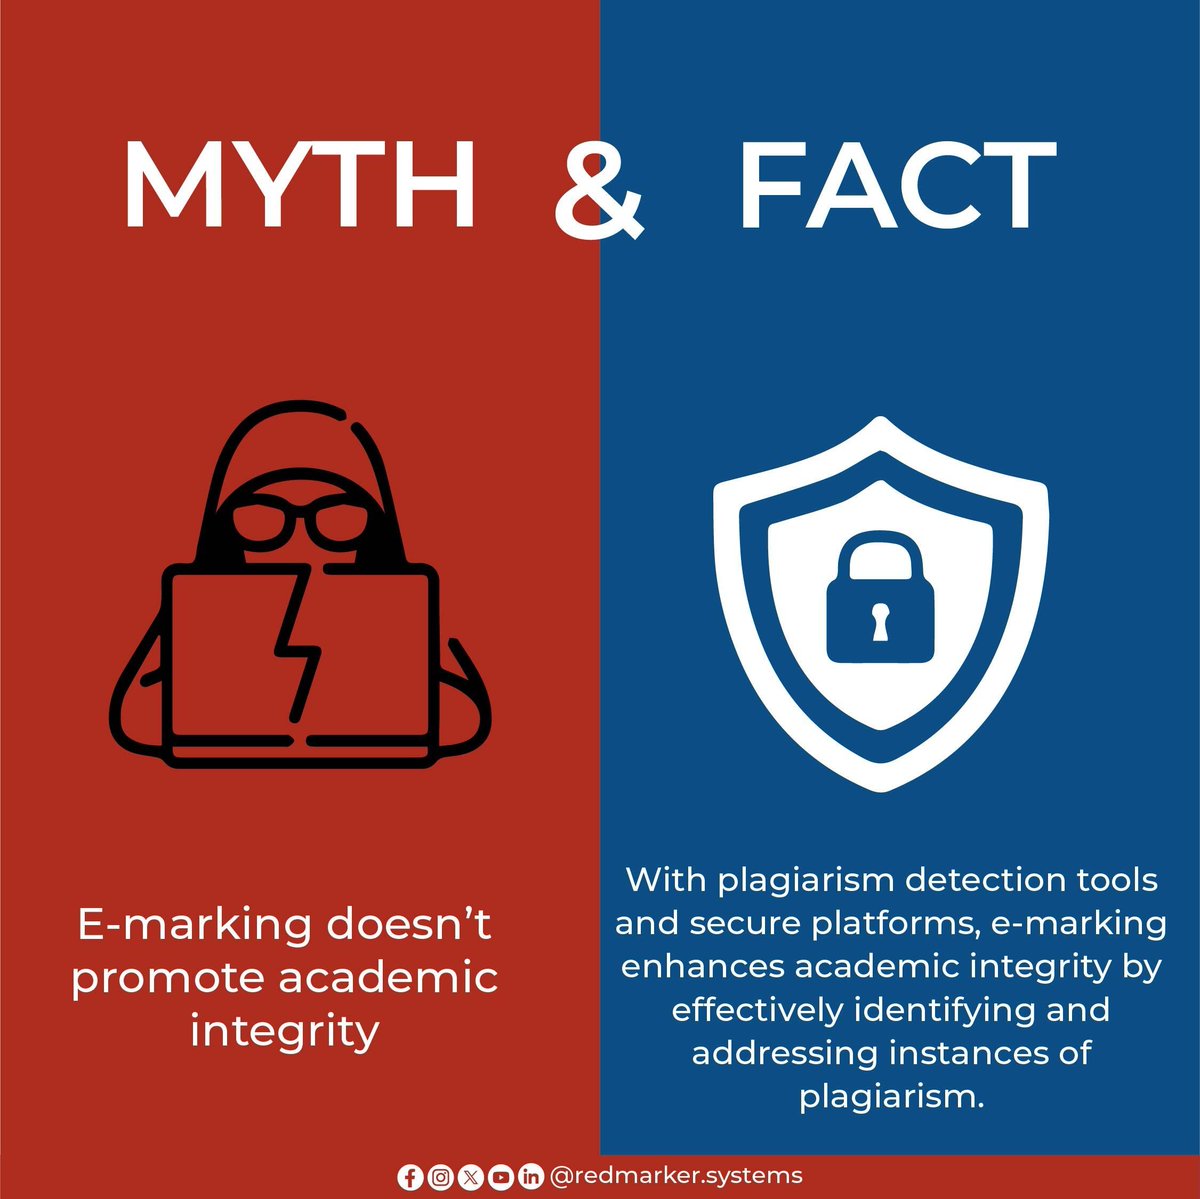 Debunking the Myths!

Myth: E-marking doesn’t promote academic integrity ❌

Fact: With plagiarism detection tools and secure platforms, #emarking enhances academic integrity by effectively identifying and addressing instances of plagiarism. ✅

#OnlineMarking #Elearning #EdTech